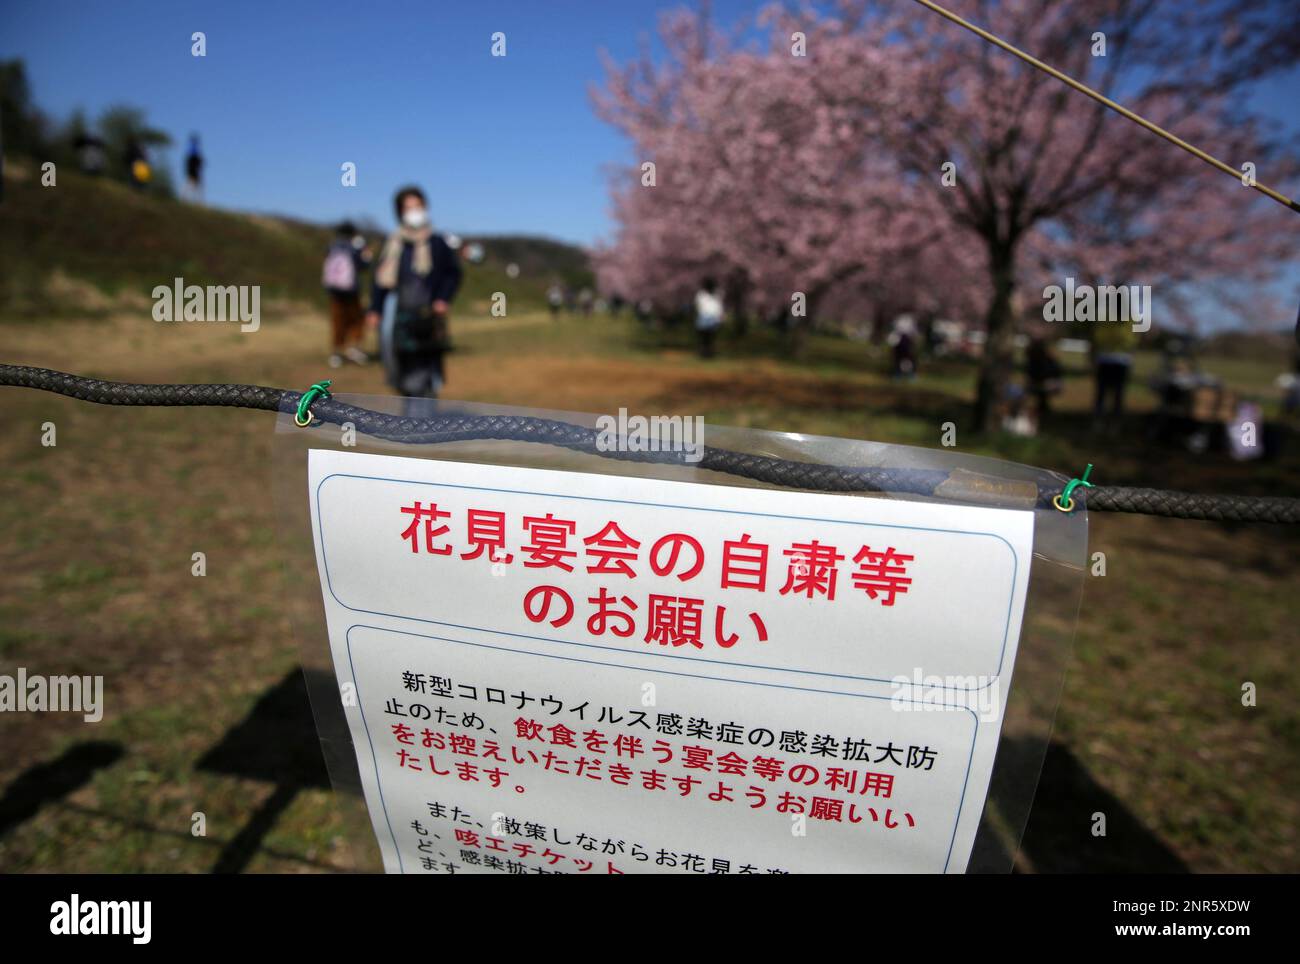 Information which request not to eat and drink under cherry blossoms in full bloom at Kitaasaba Sakura Zutsumi park in Sakado, Saitama Prefecture on March 12, 2020, amid an outbreak of the coronavirus CIVID-19 in Japan. It is Japanese traditional custom to gather under the trees and enjoy earing and drinking in cherry blossom, sakura, season. ( The Yomiuri Shimbun via AP Images ) Foto Stock